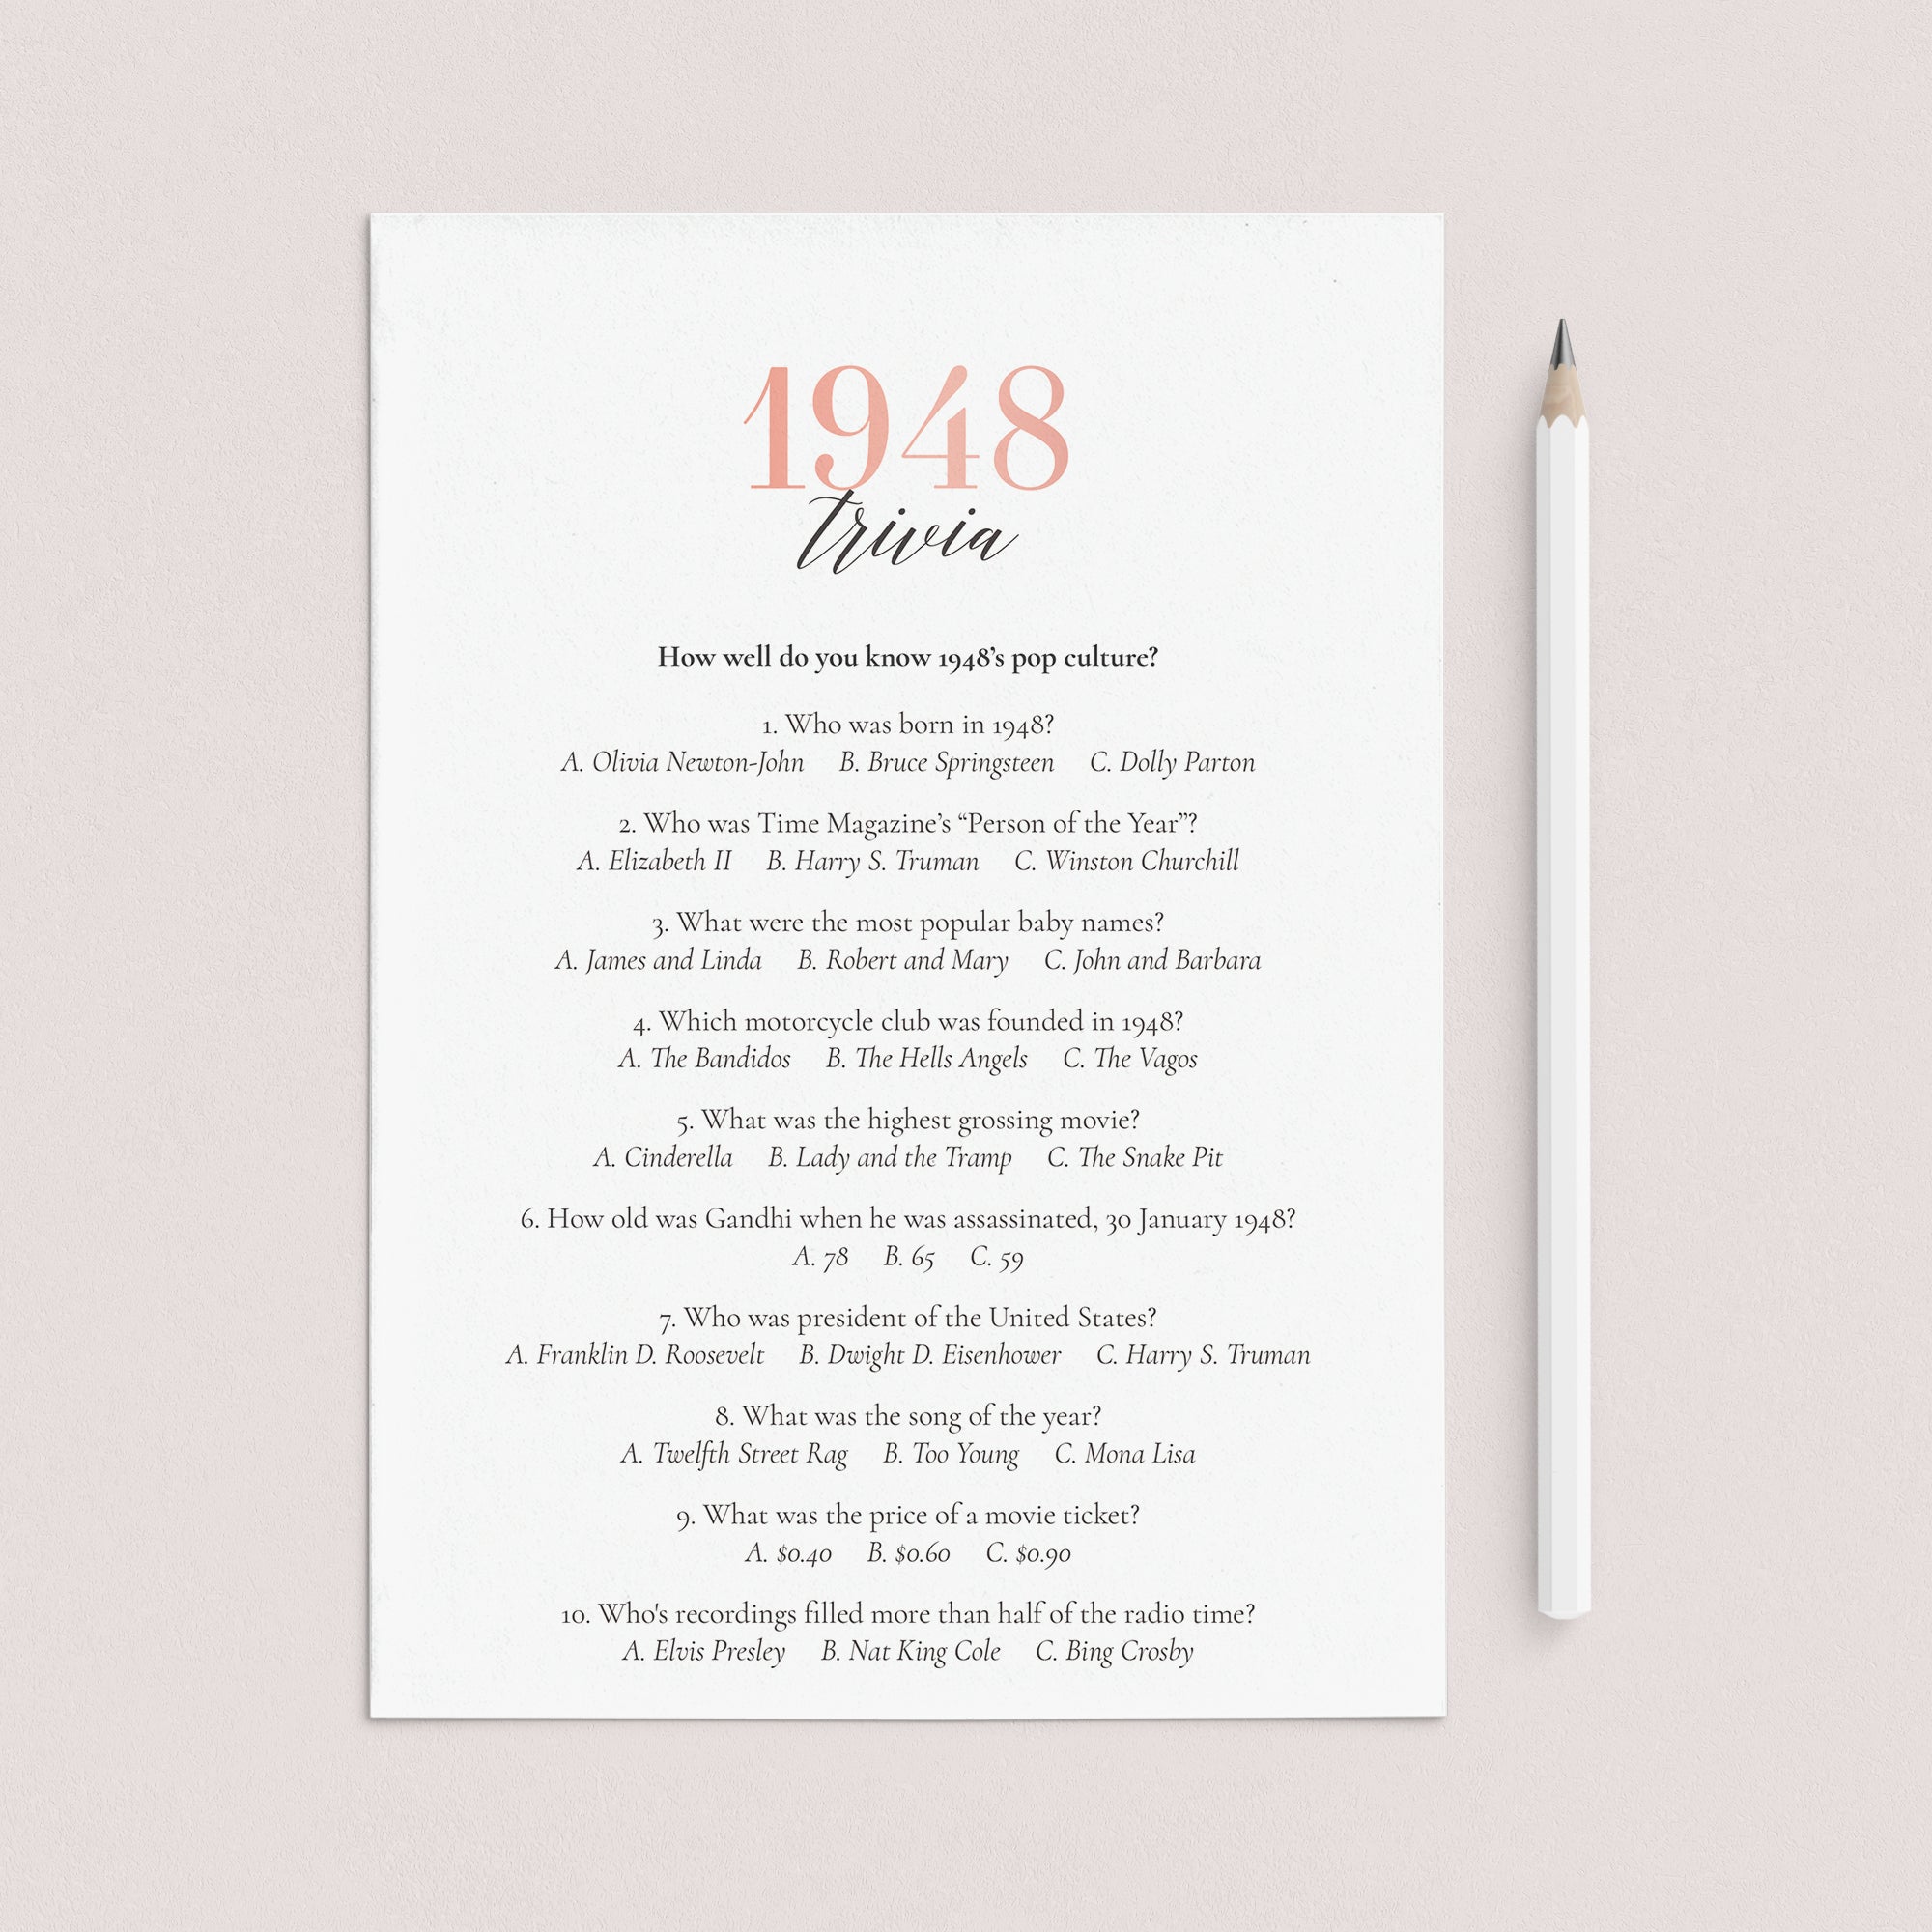 1948 Trivia Questions and Answers Printable by LittleSizzle